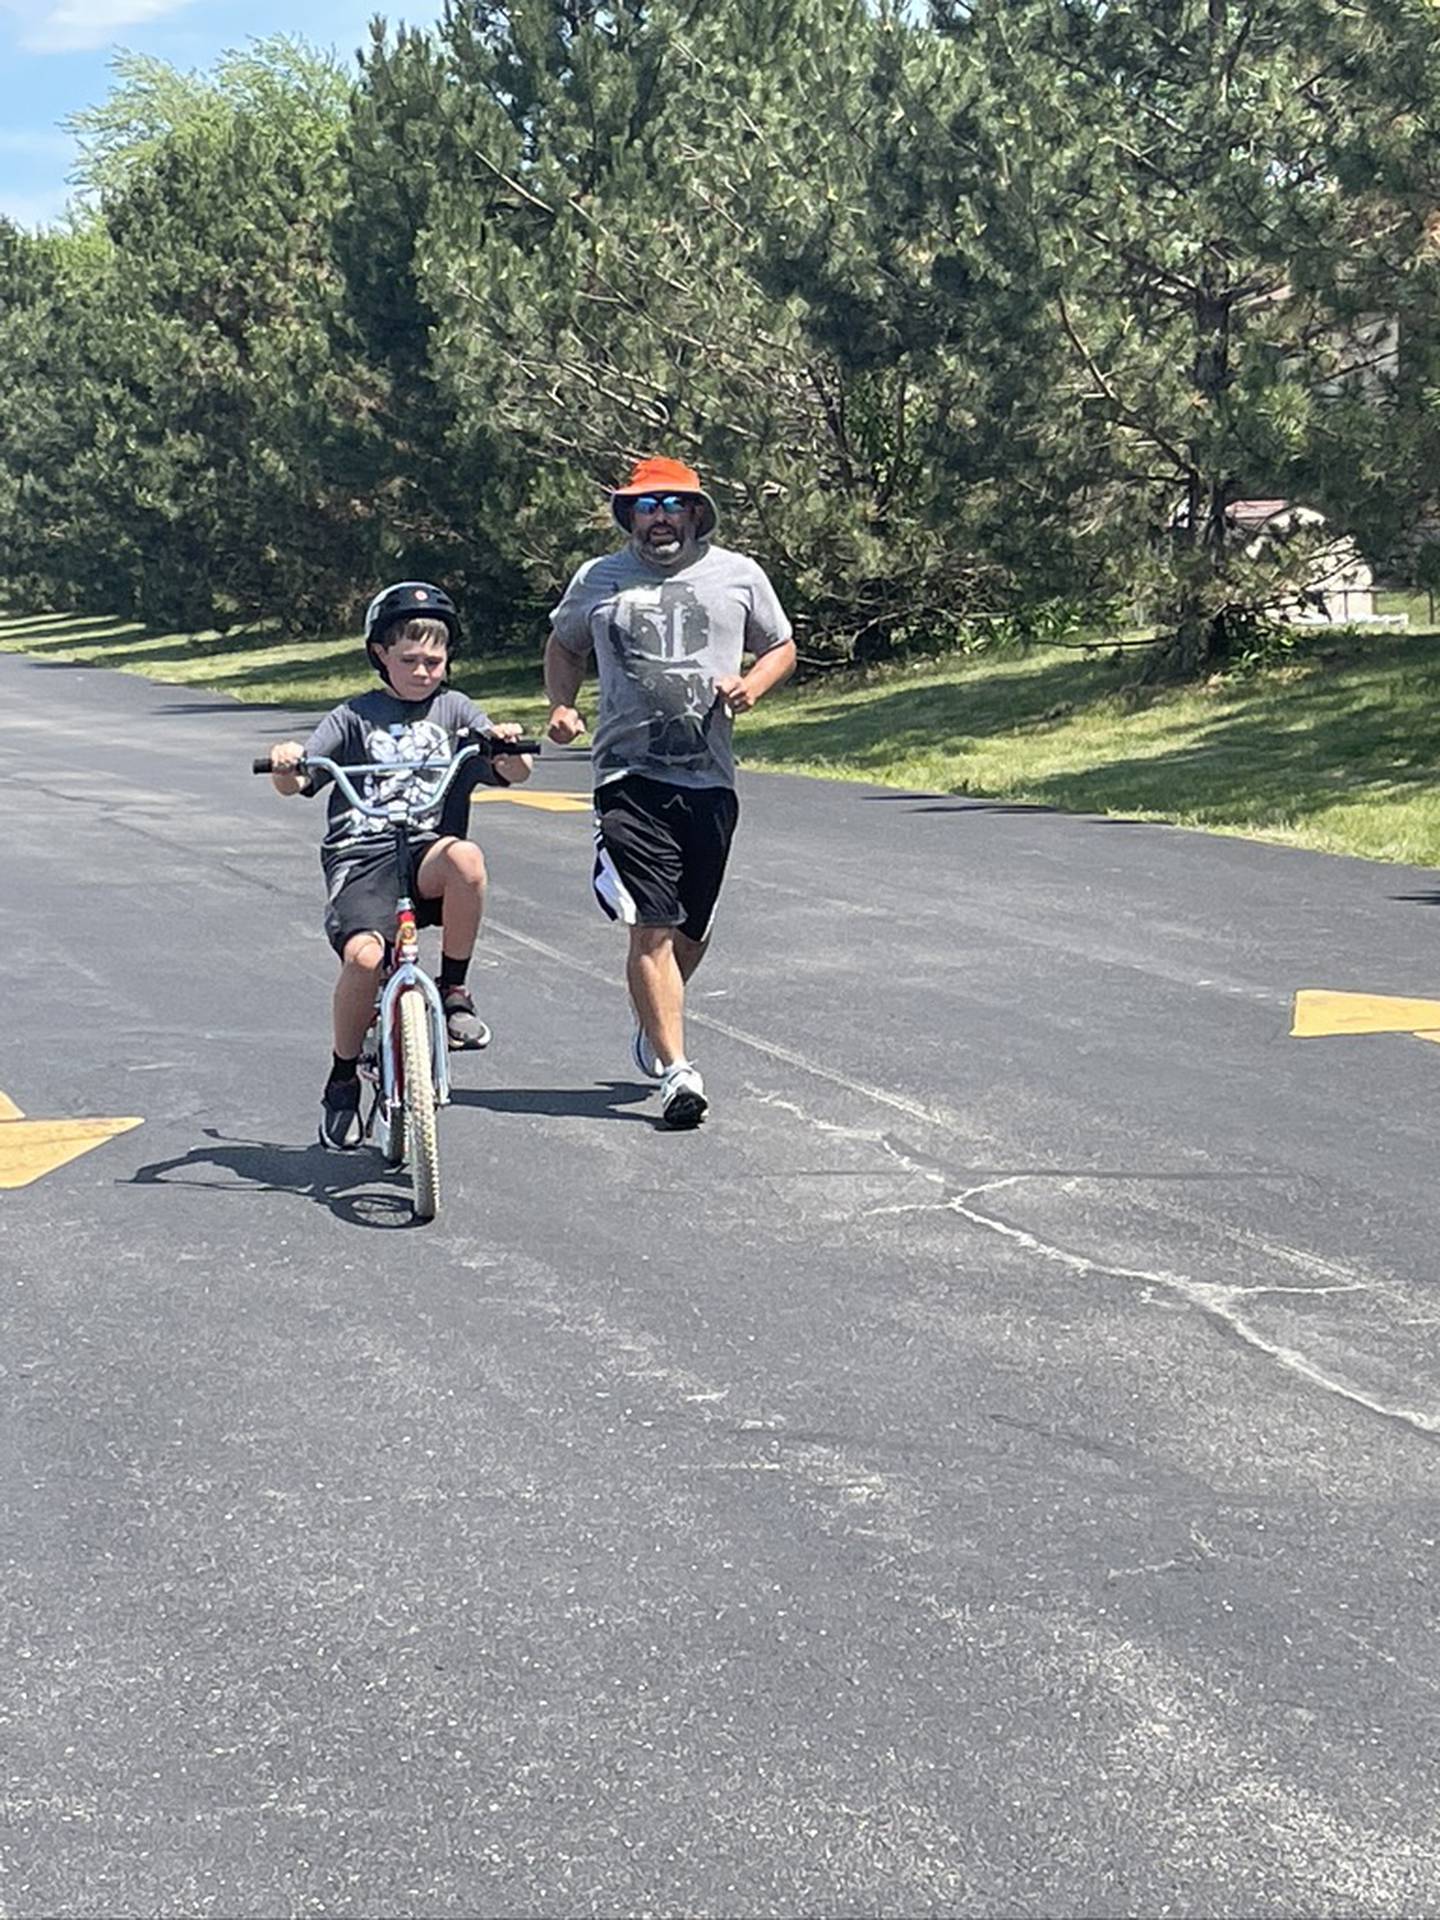 Noah Christie practices his biking skills with the help of supervisor Fred Manzi. 
The iCan Bike program, which teaches people with disabilities ages 8 and up to ride a conventional two-wheel bike, was June 14 to June 18, 2021, at Spencer Crossing School in New Lenox.